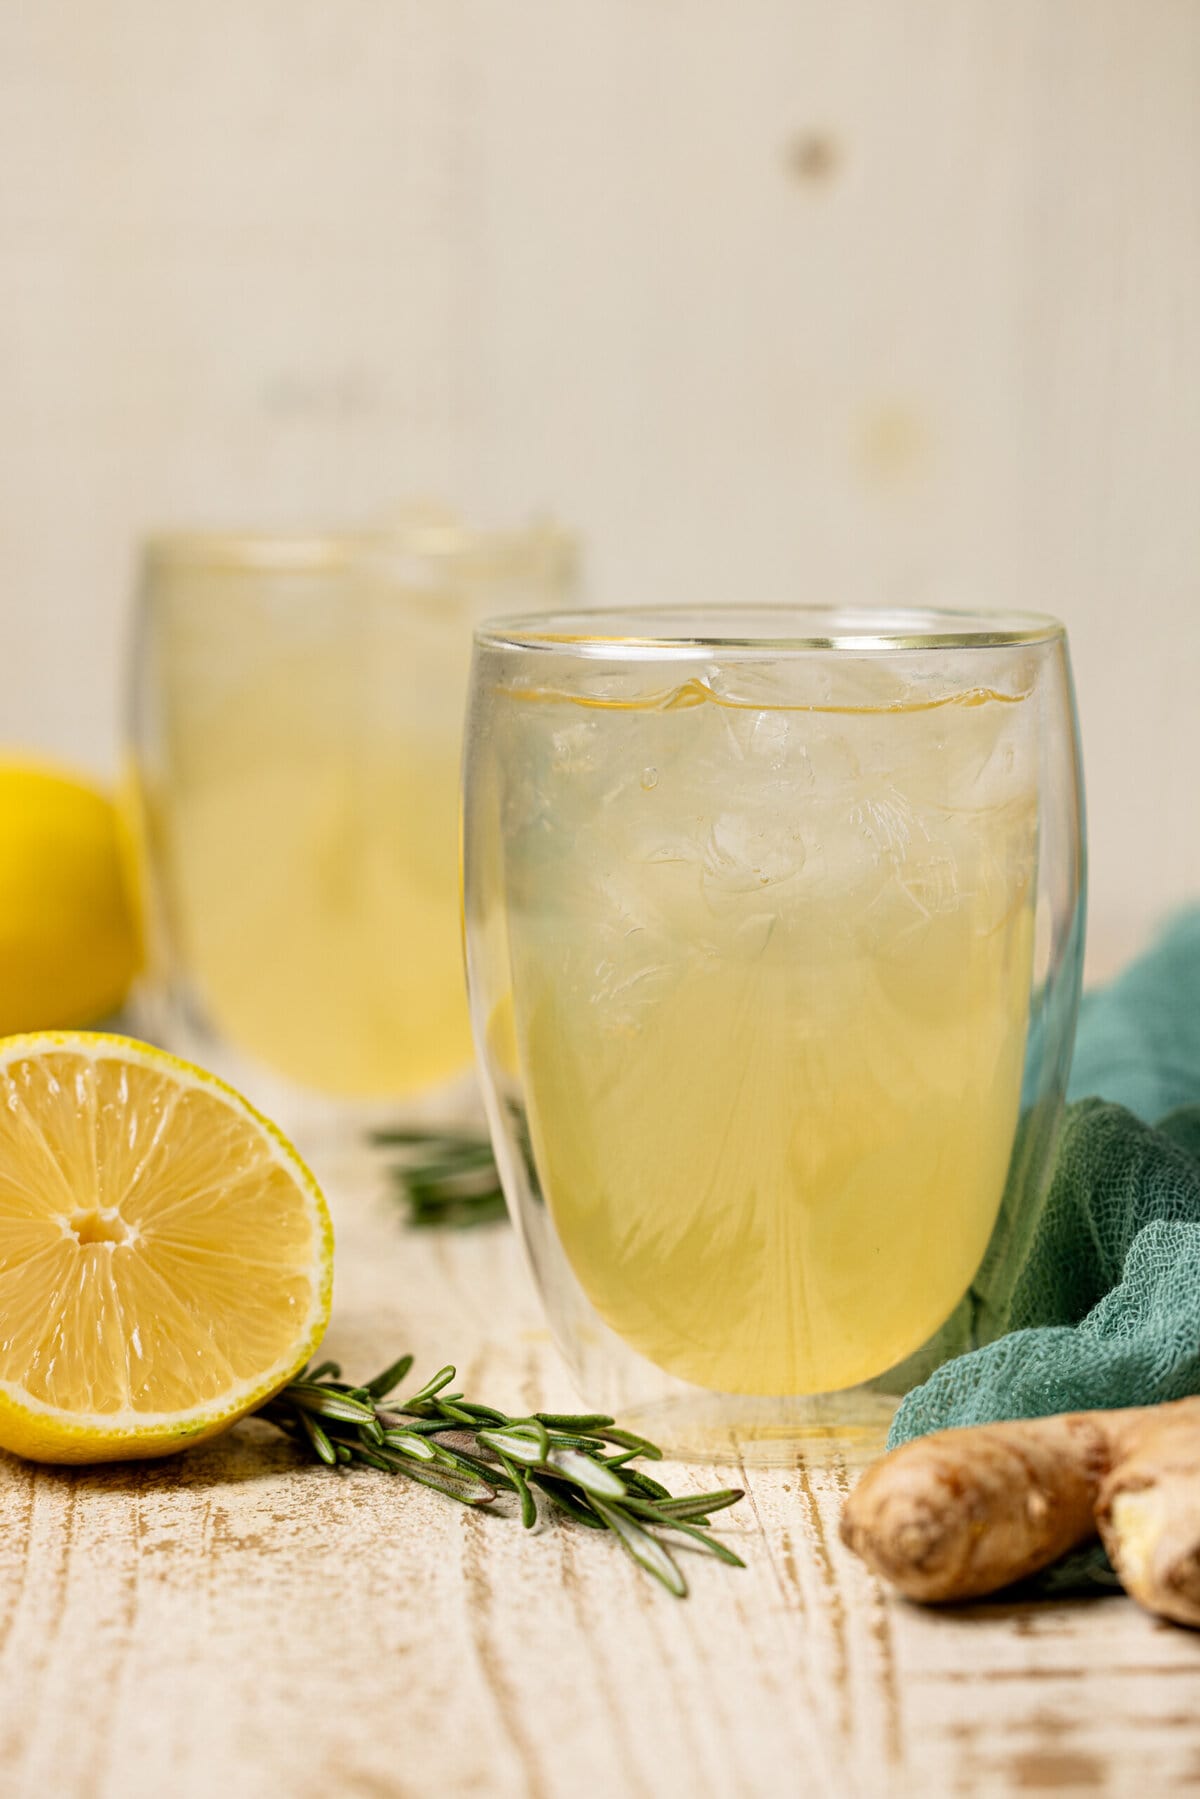 Ginger ale in a clear glass with lemon, ginger root, and rosemary.